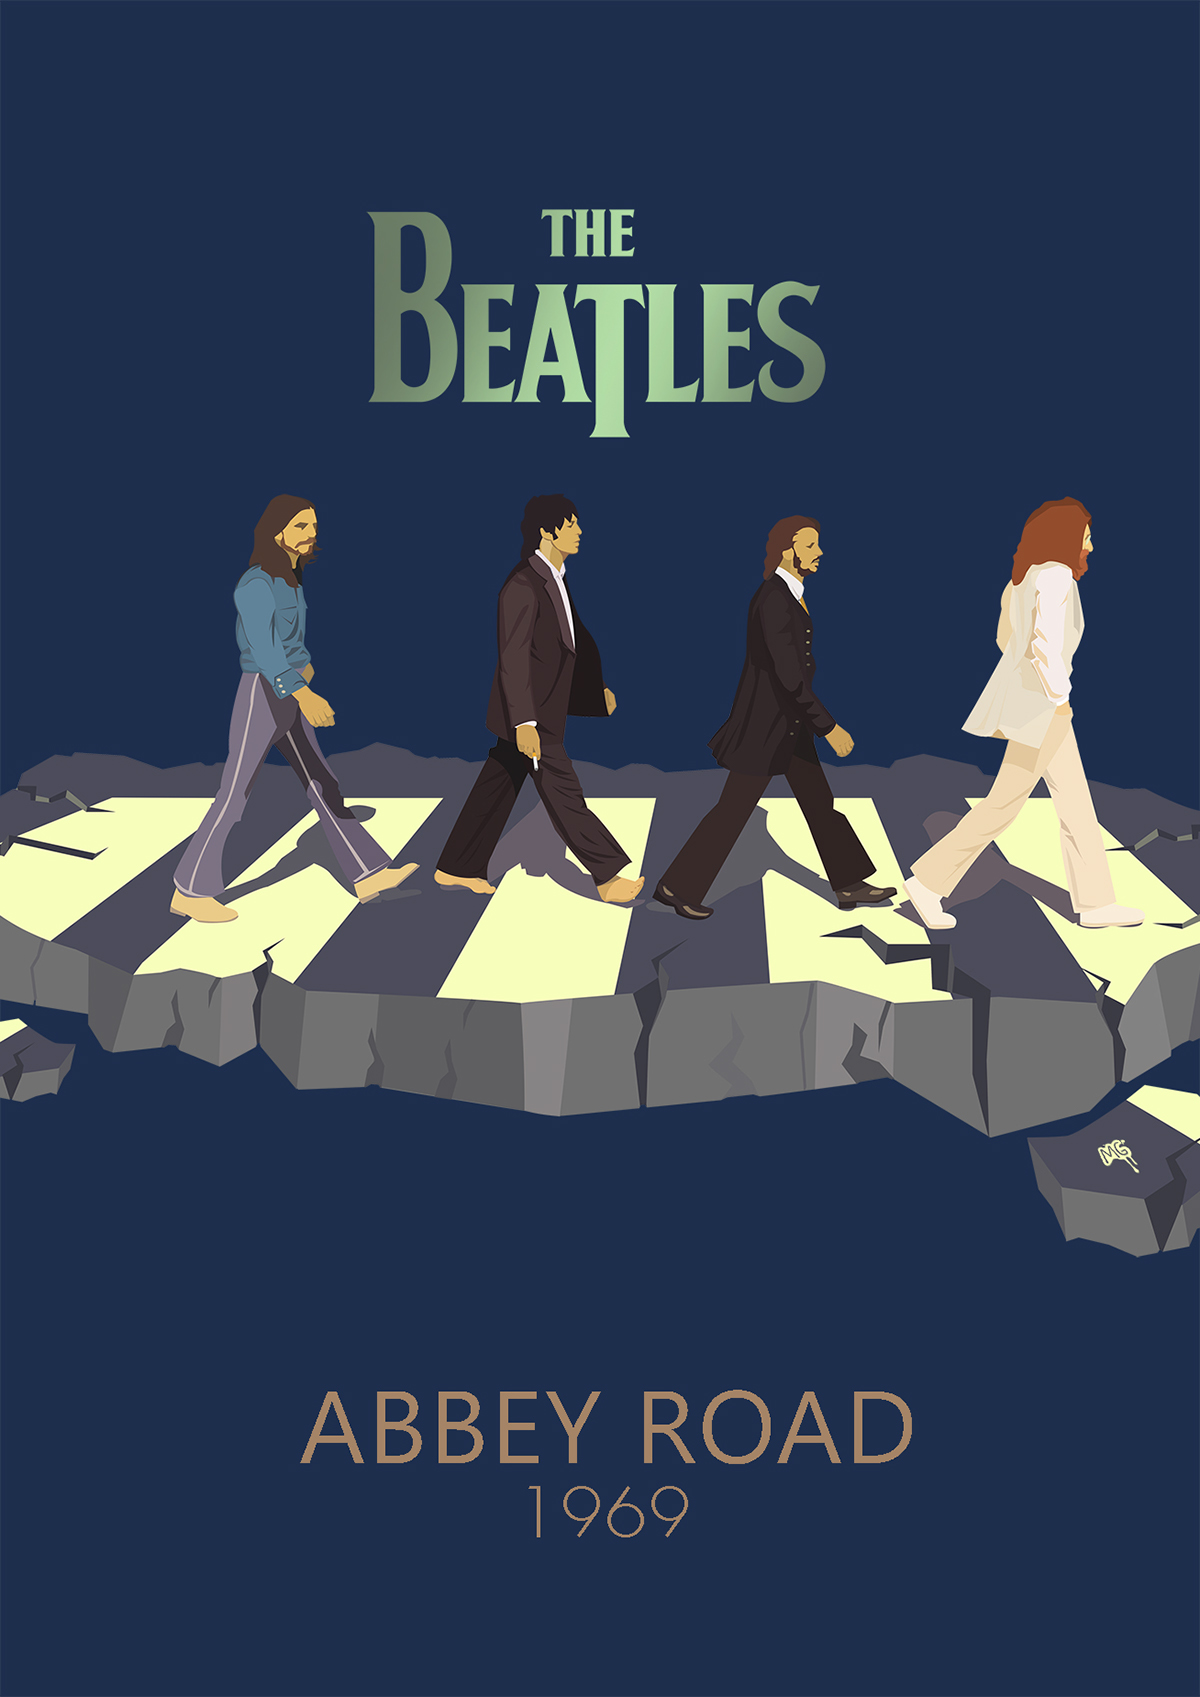 The Beatles on Abbey Road on Behance